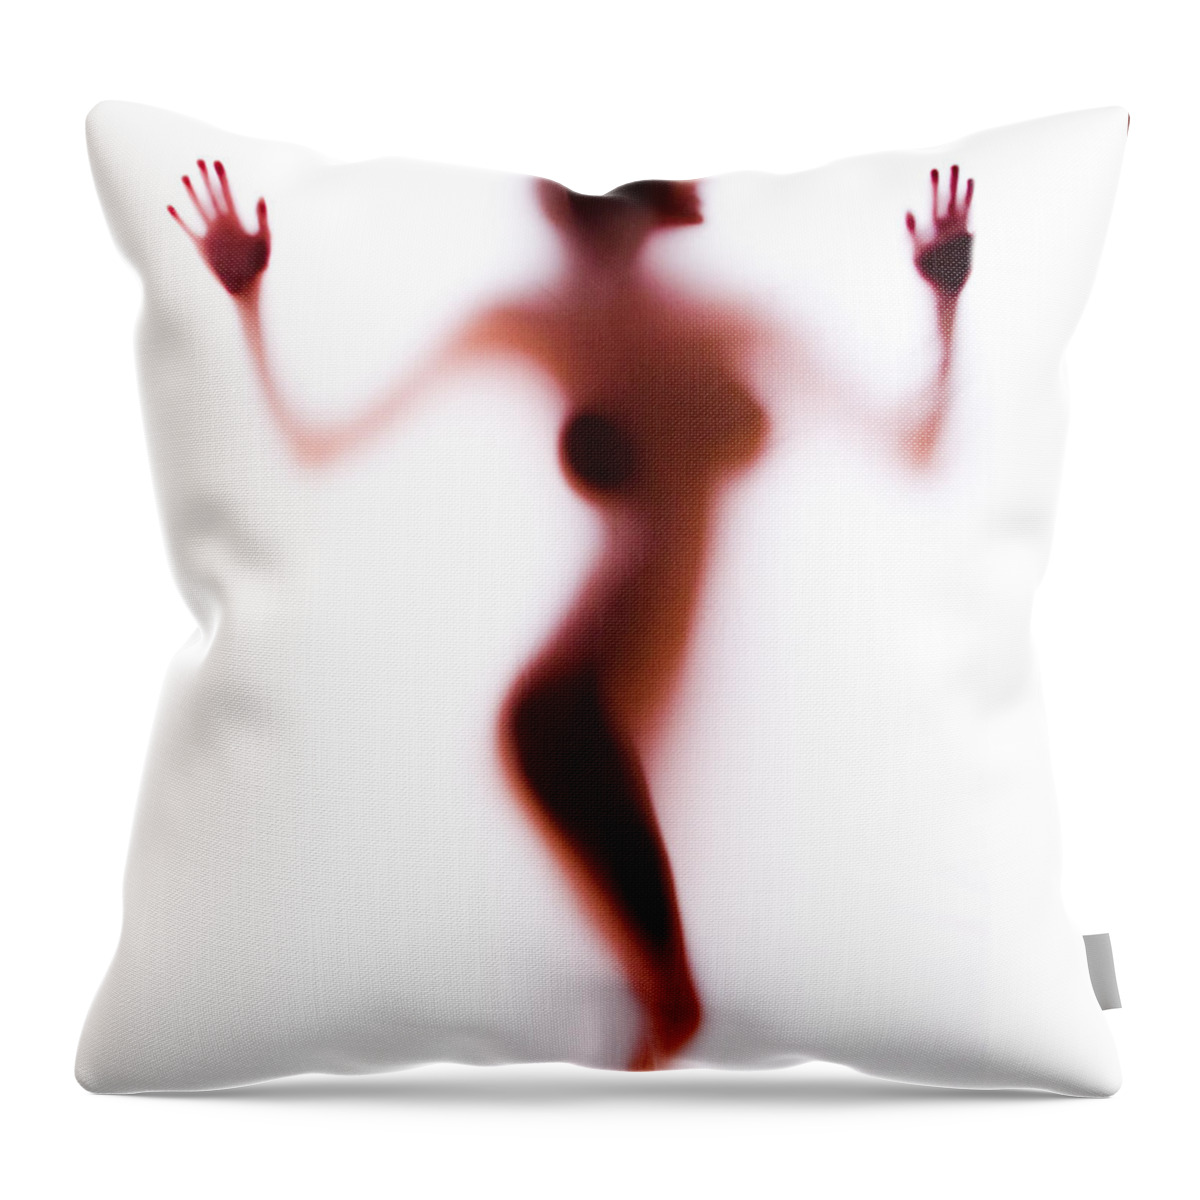 Silhouette Throw Pillow featuring the photograph Silhouette 14 by Michael Fryd